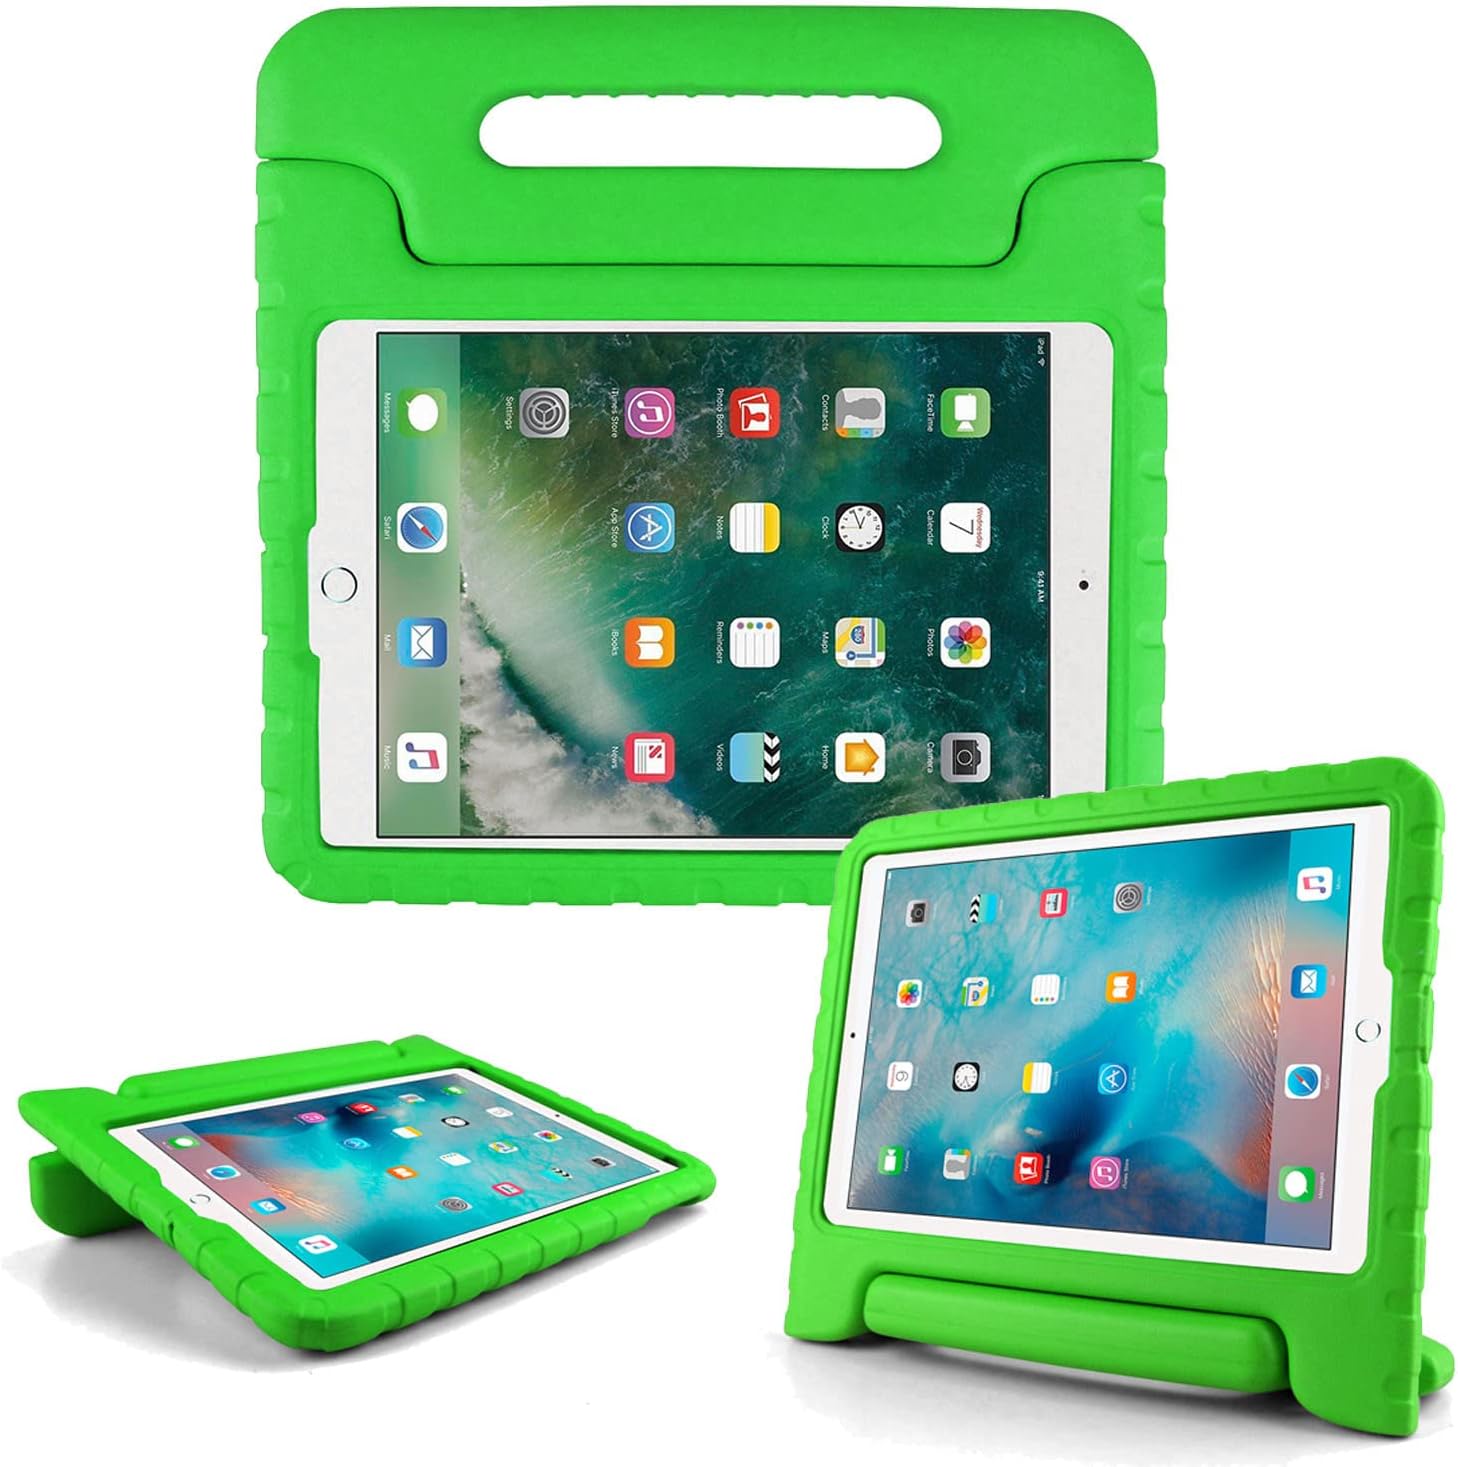 iPad 9.7 inch Shockproof Case w Handle & Stand (Green) *Free Shipping*